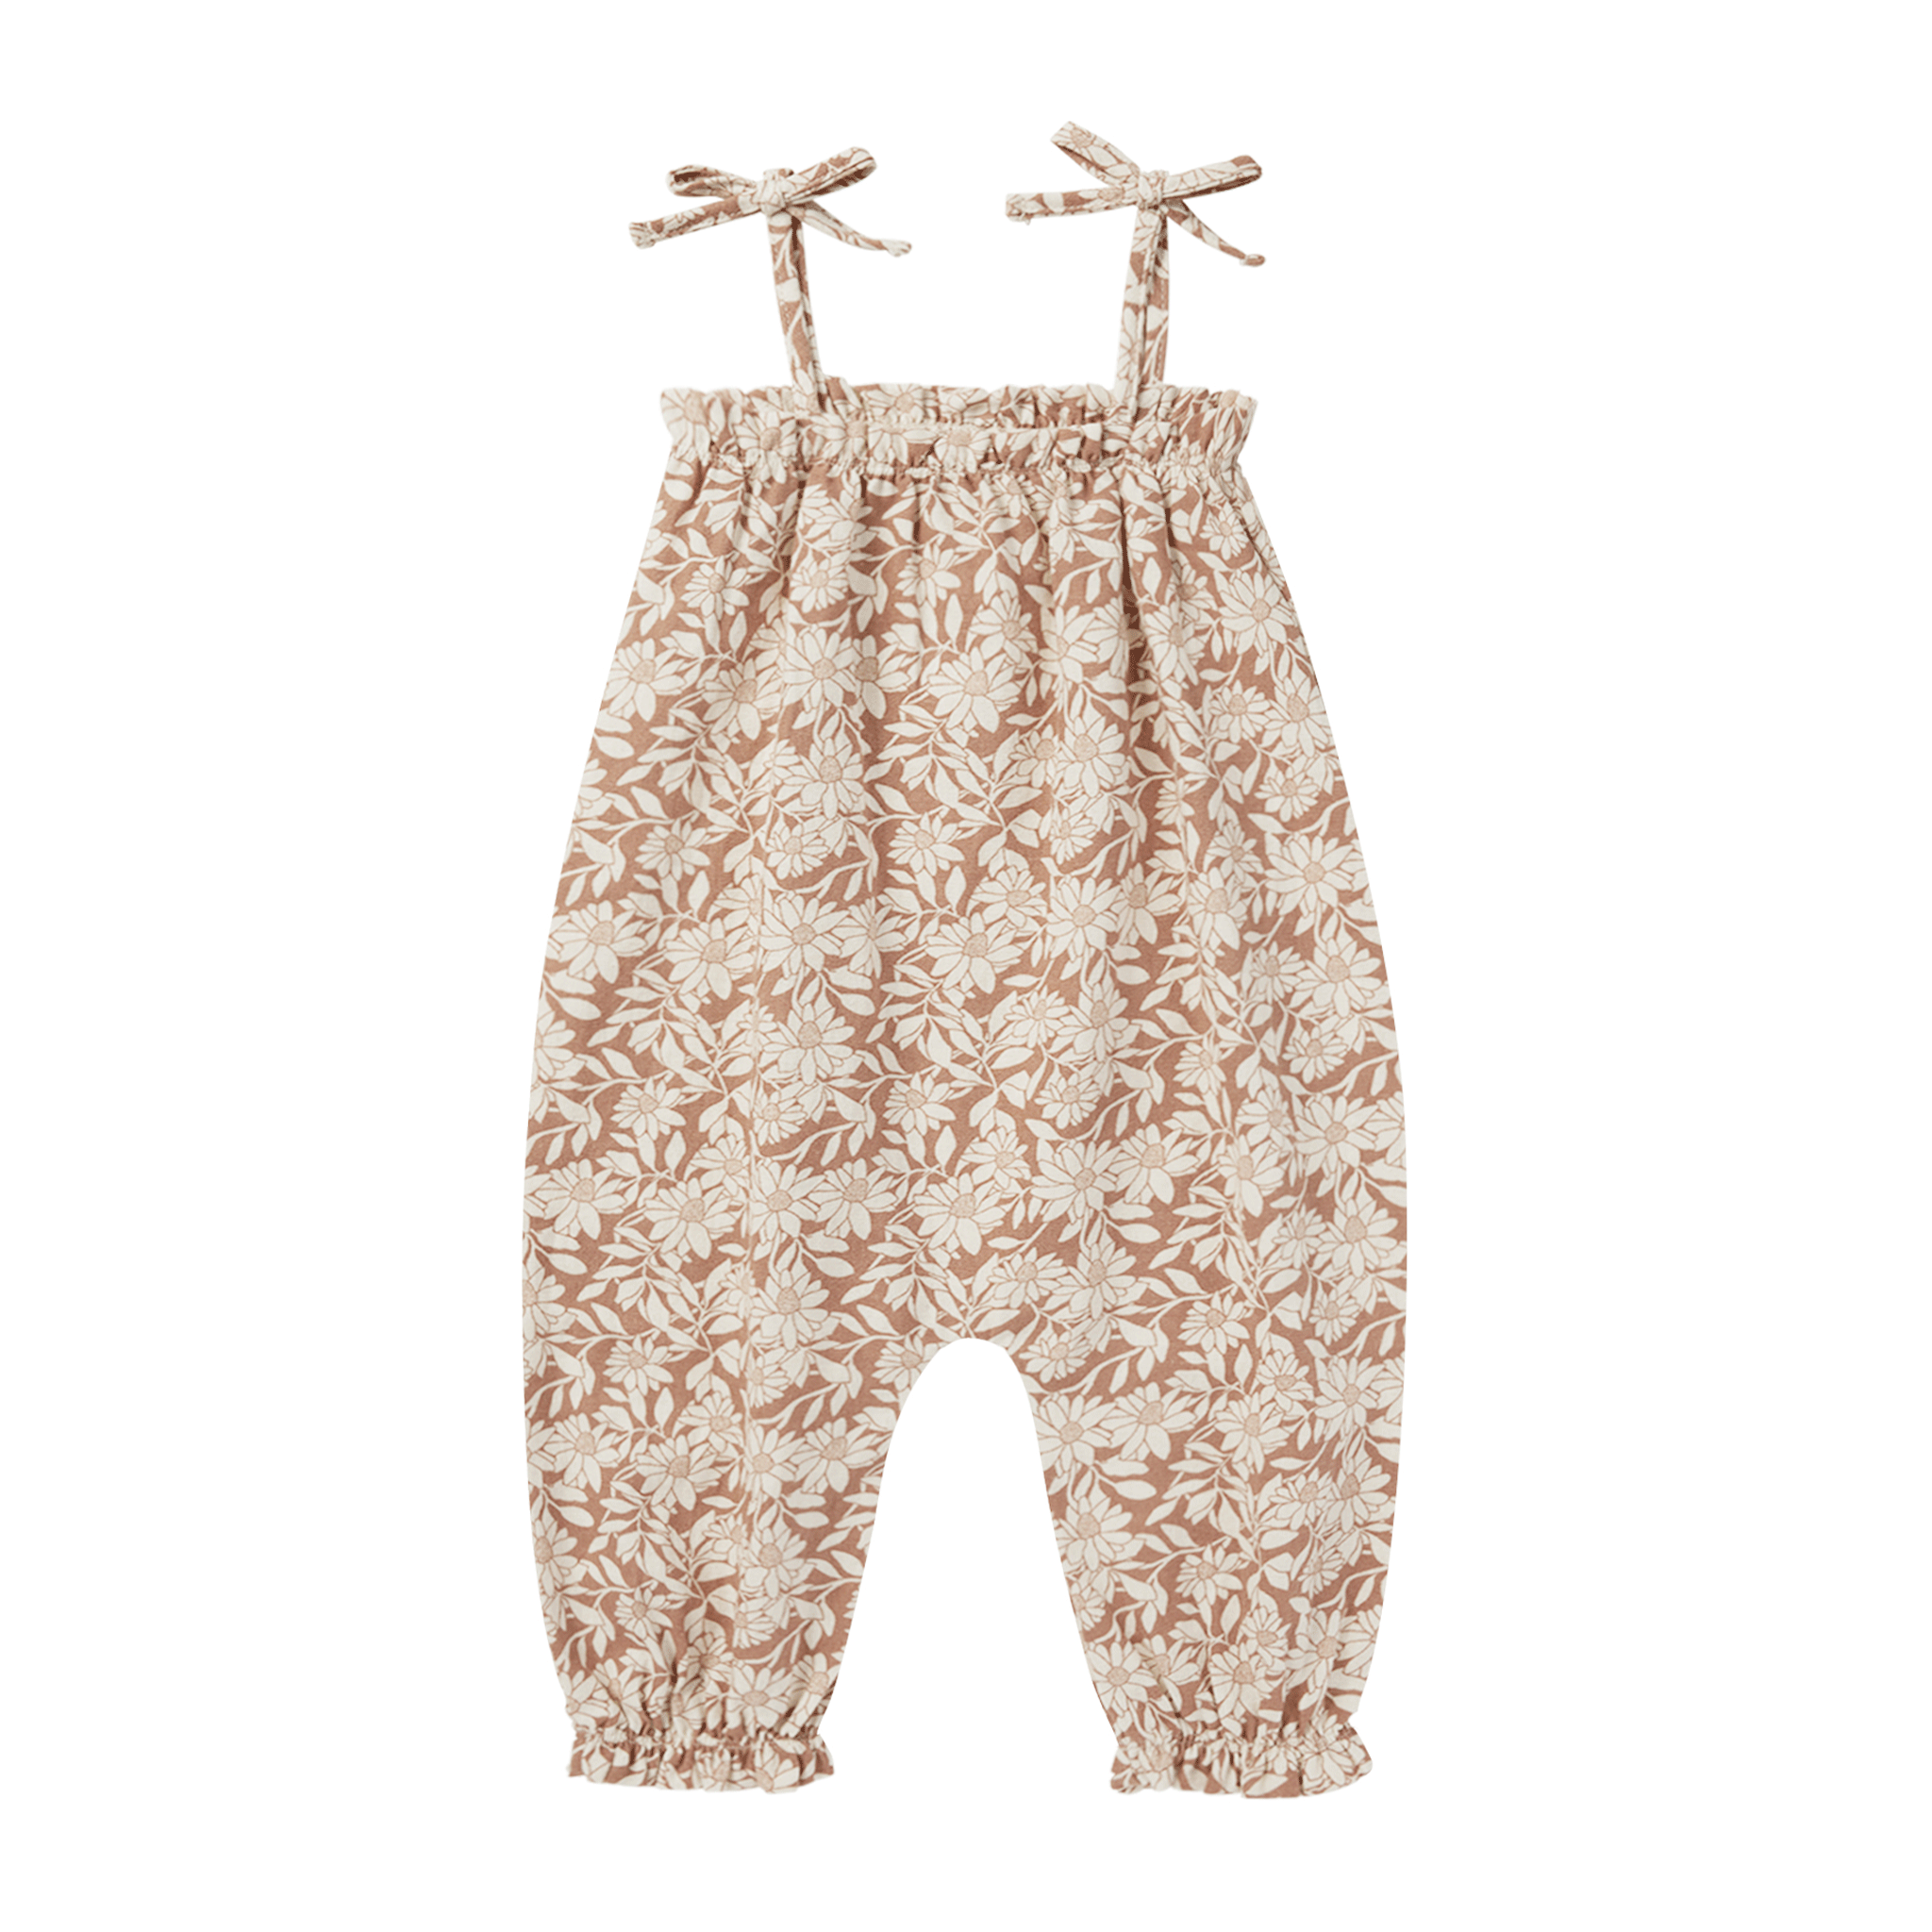 On a white background is a children&#39;s jumpsuit with a neutral floral print and shoulder tie strap details. 